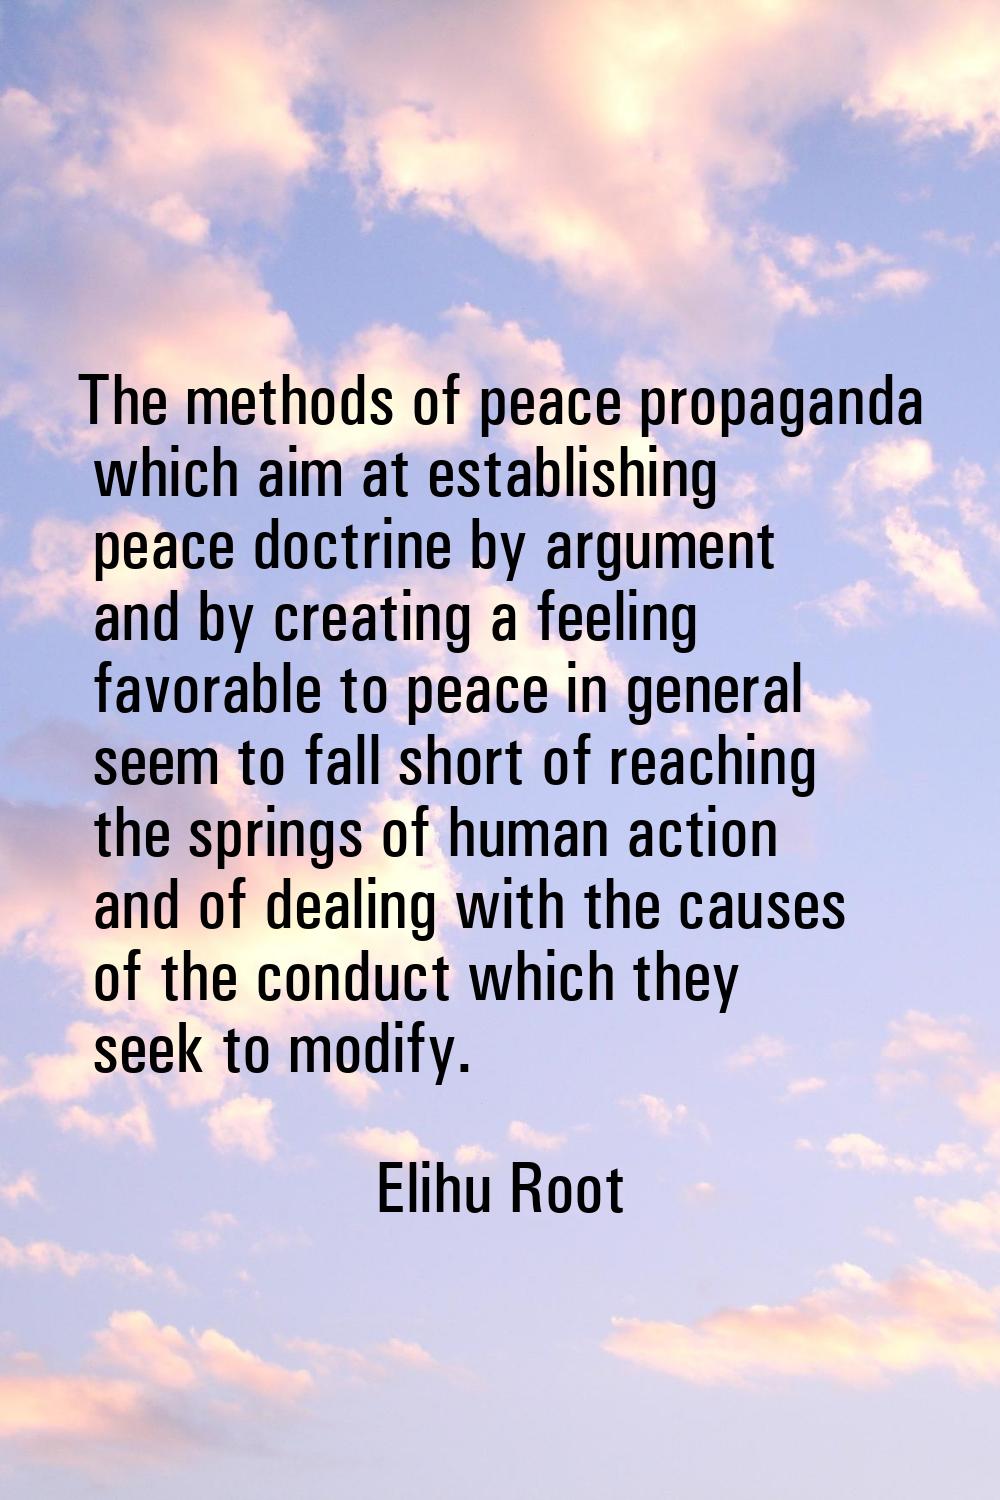 The methods of peace propaganda which aim at establishing peace doctrine by argument and by creatin